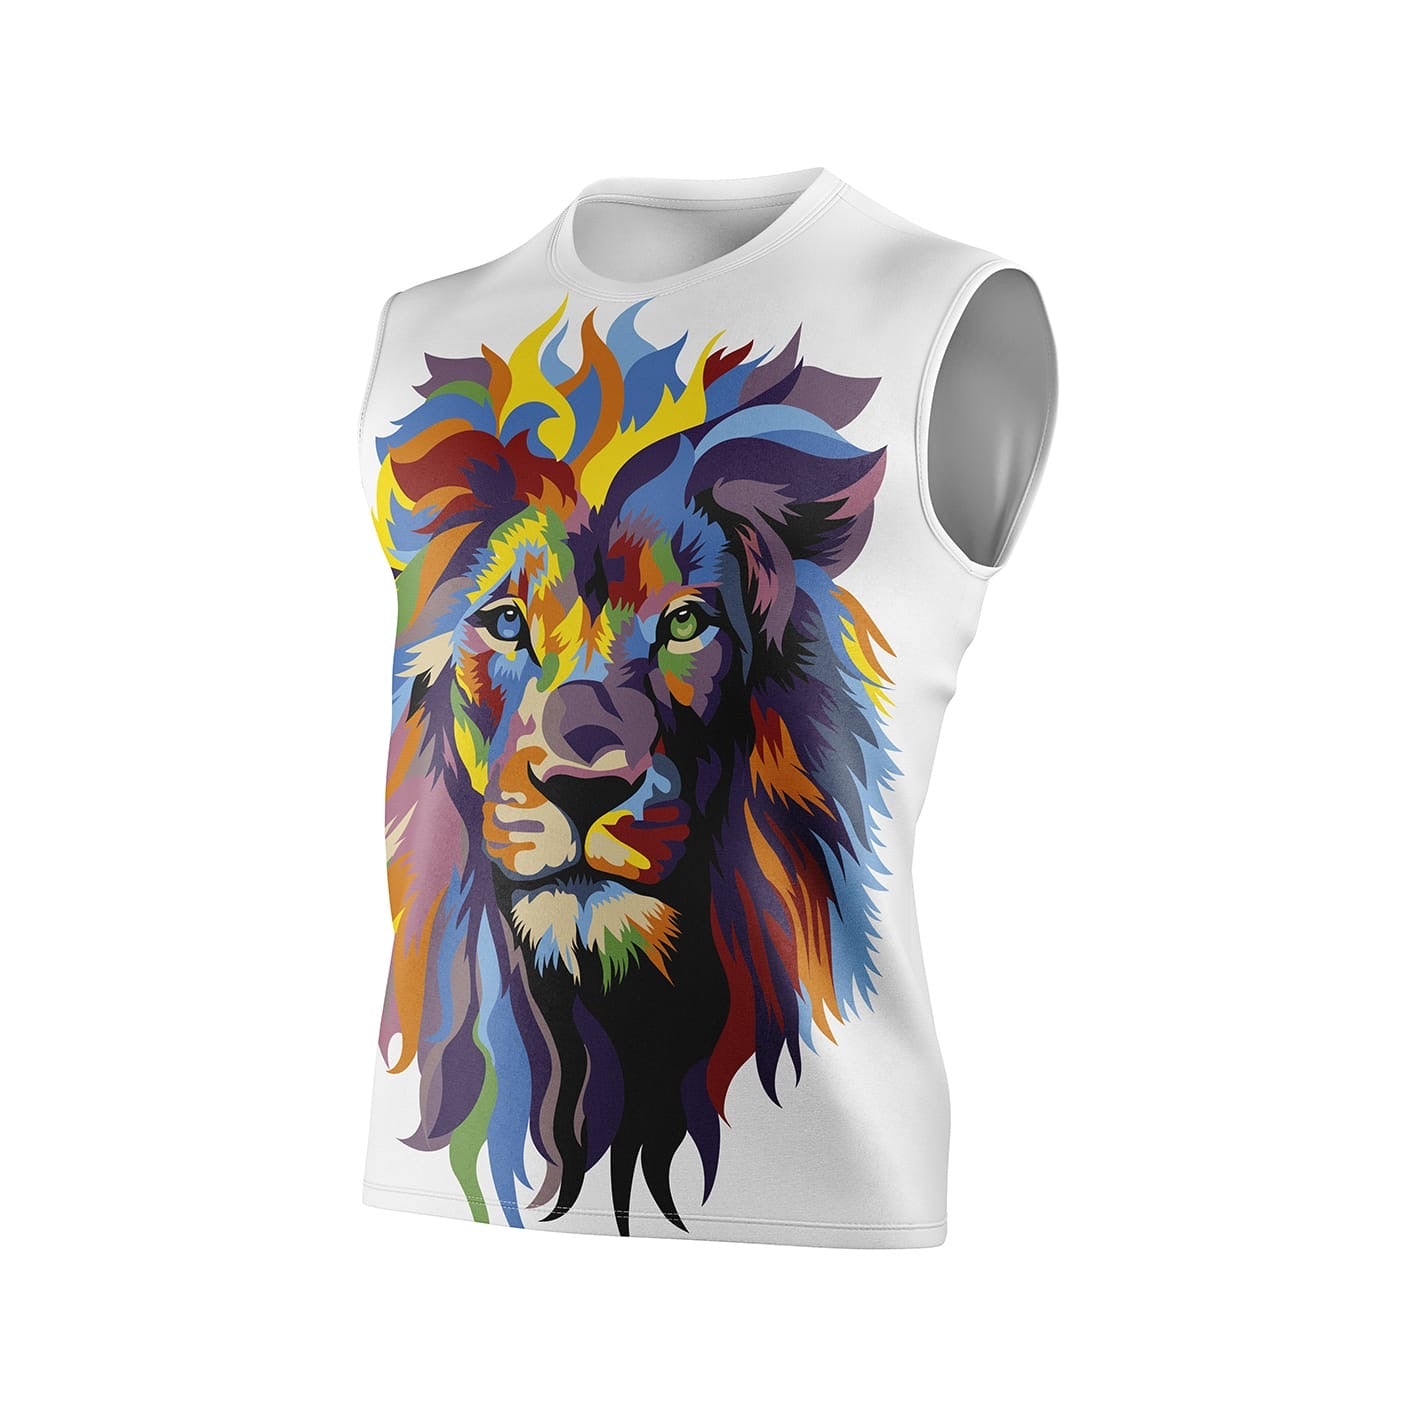 Camiseta sin mangas hombre - Be A Lion